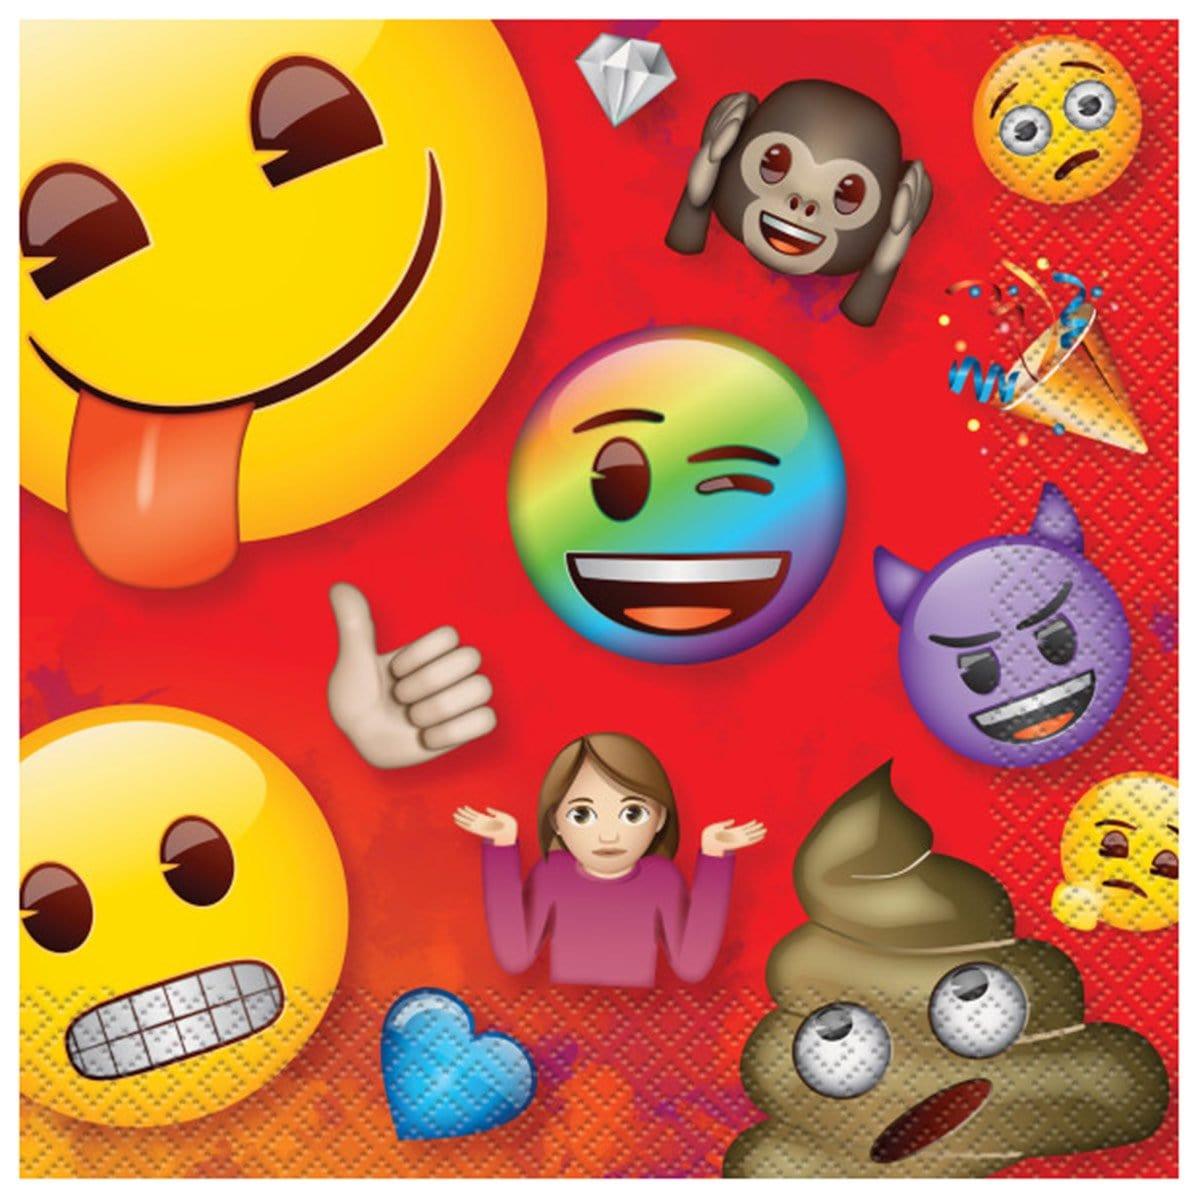 Buy Kids Birthday Emoji lunch napkins, 16 per package sold at Party Expert